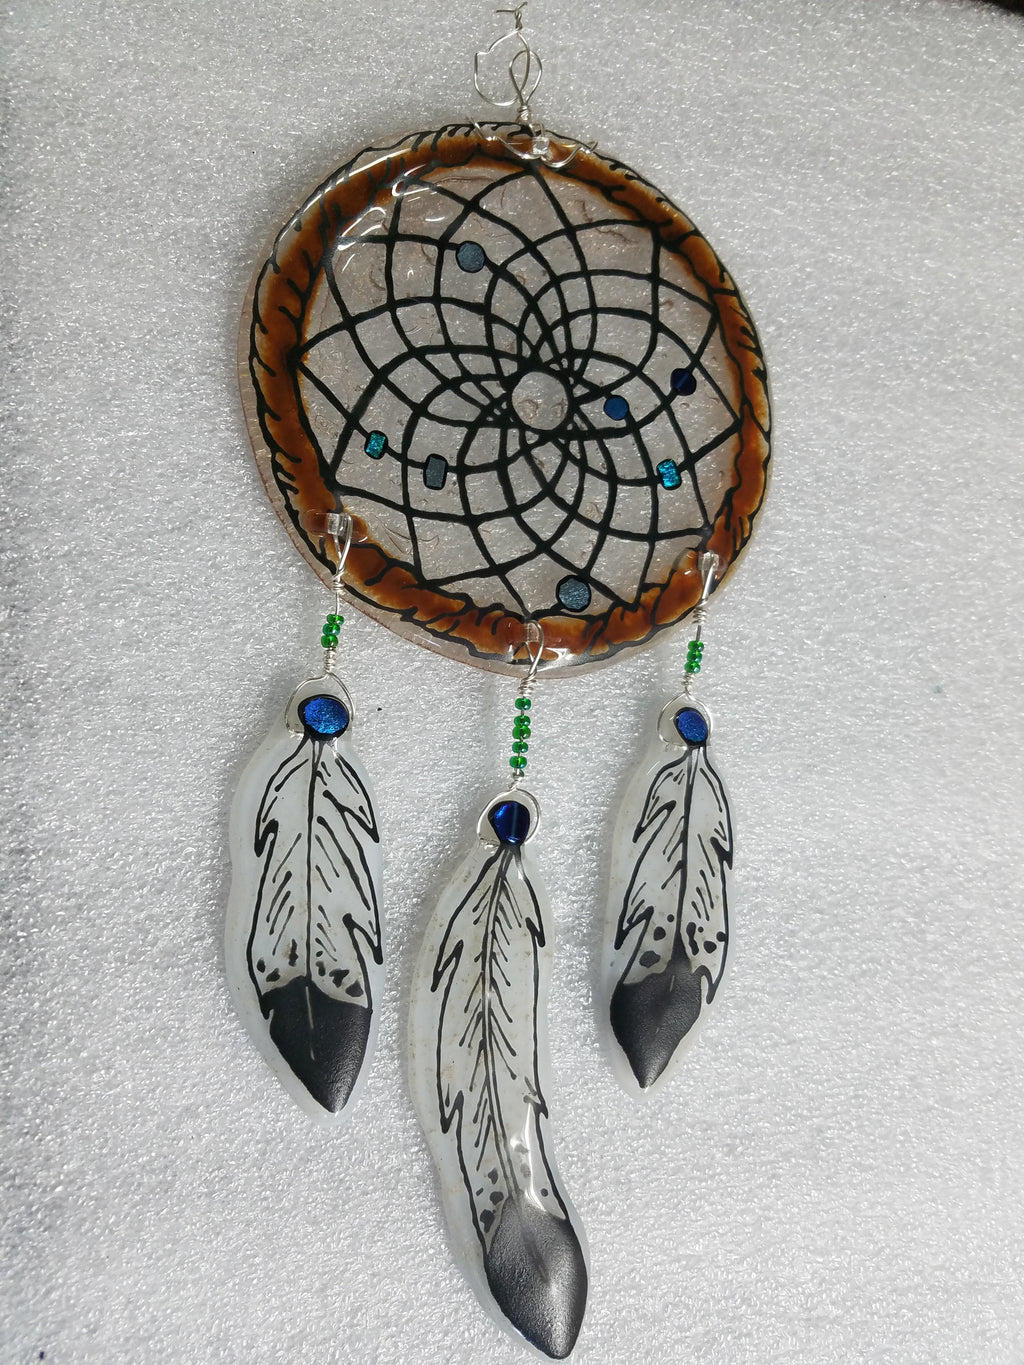 Ashes InFused Glass Cremation Art Sun Catcher 6 inch Dream Catcher 3 Feathers